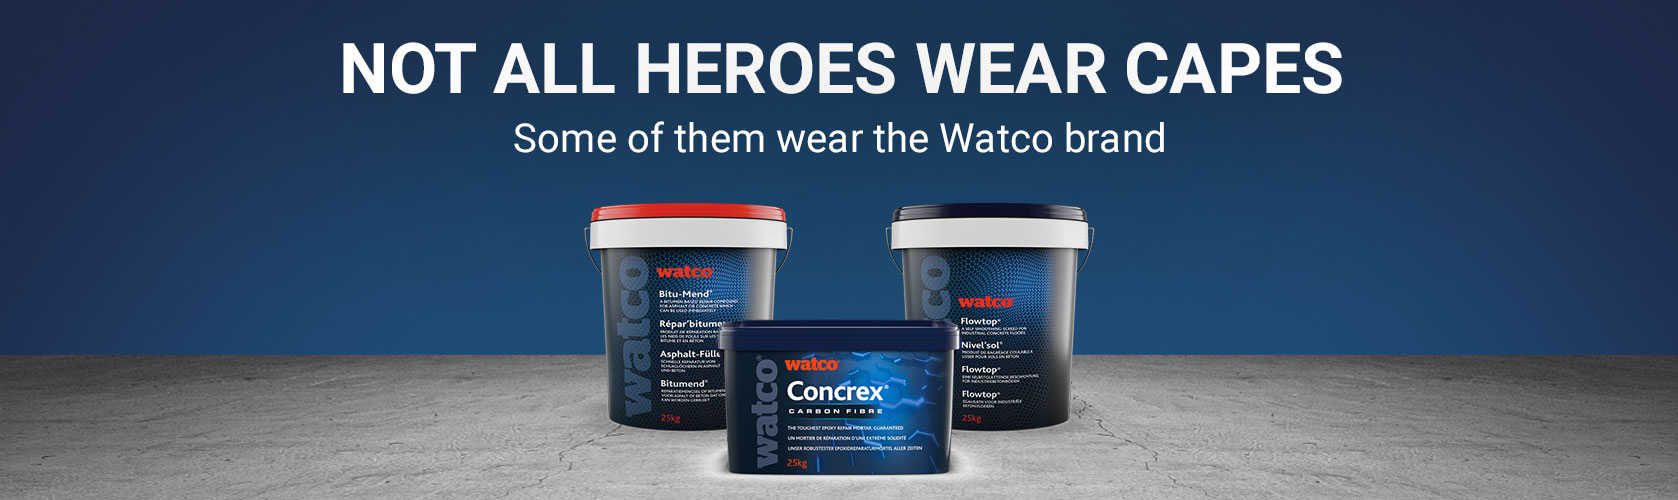 Not all heroes wear capes, some of them wear the Watco brand